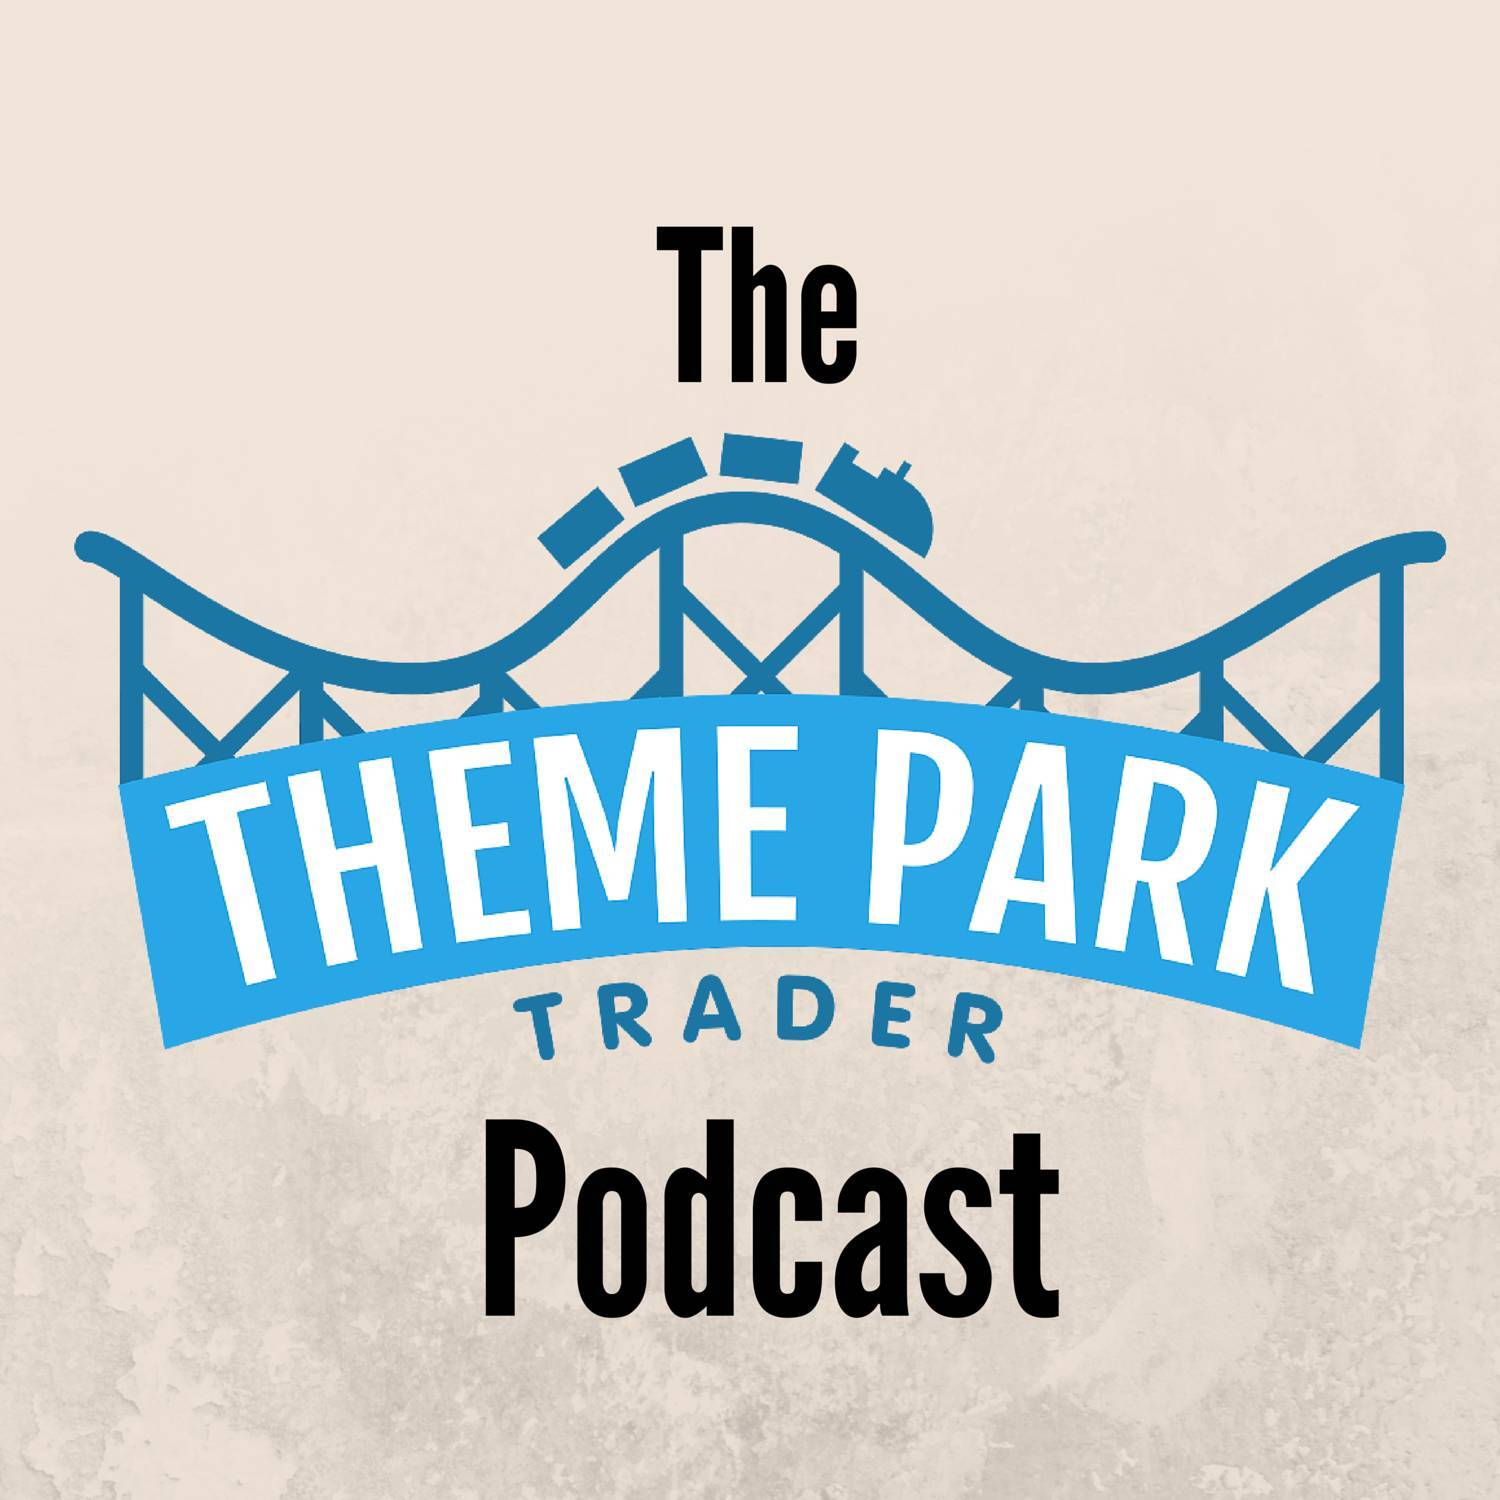 Episode 31 - Shanghai Disneyland Expansions, New Costume Rules for MNSSHP, Disneyland Tower of Terror Closure + More!